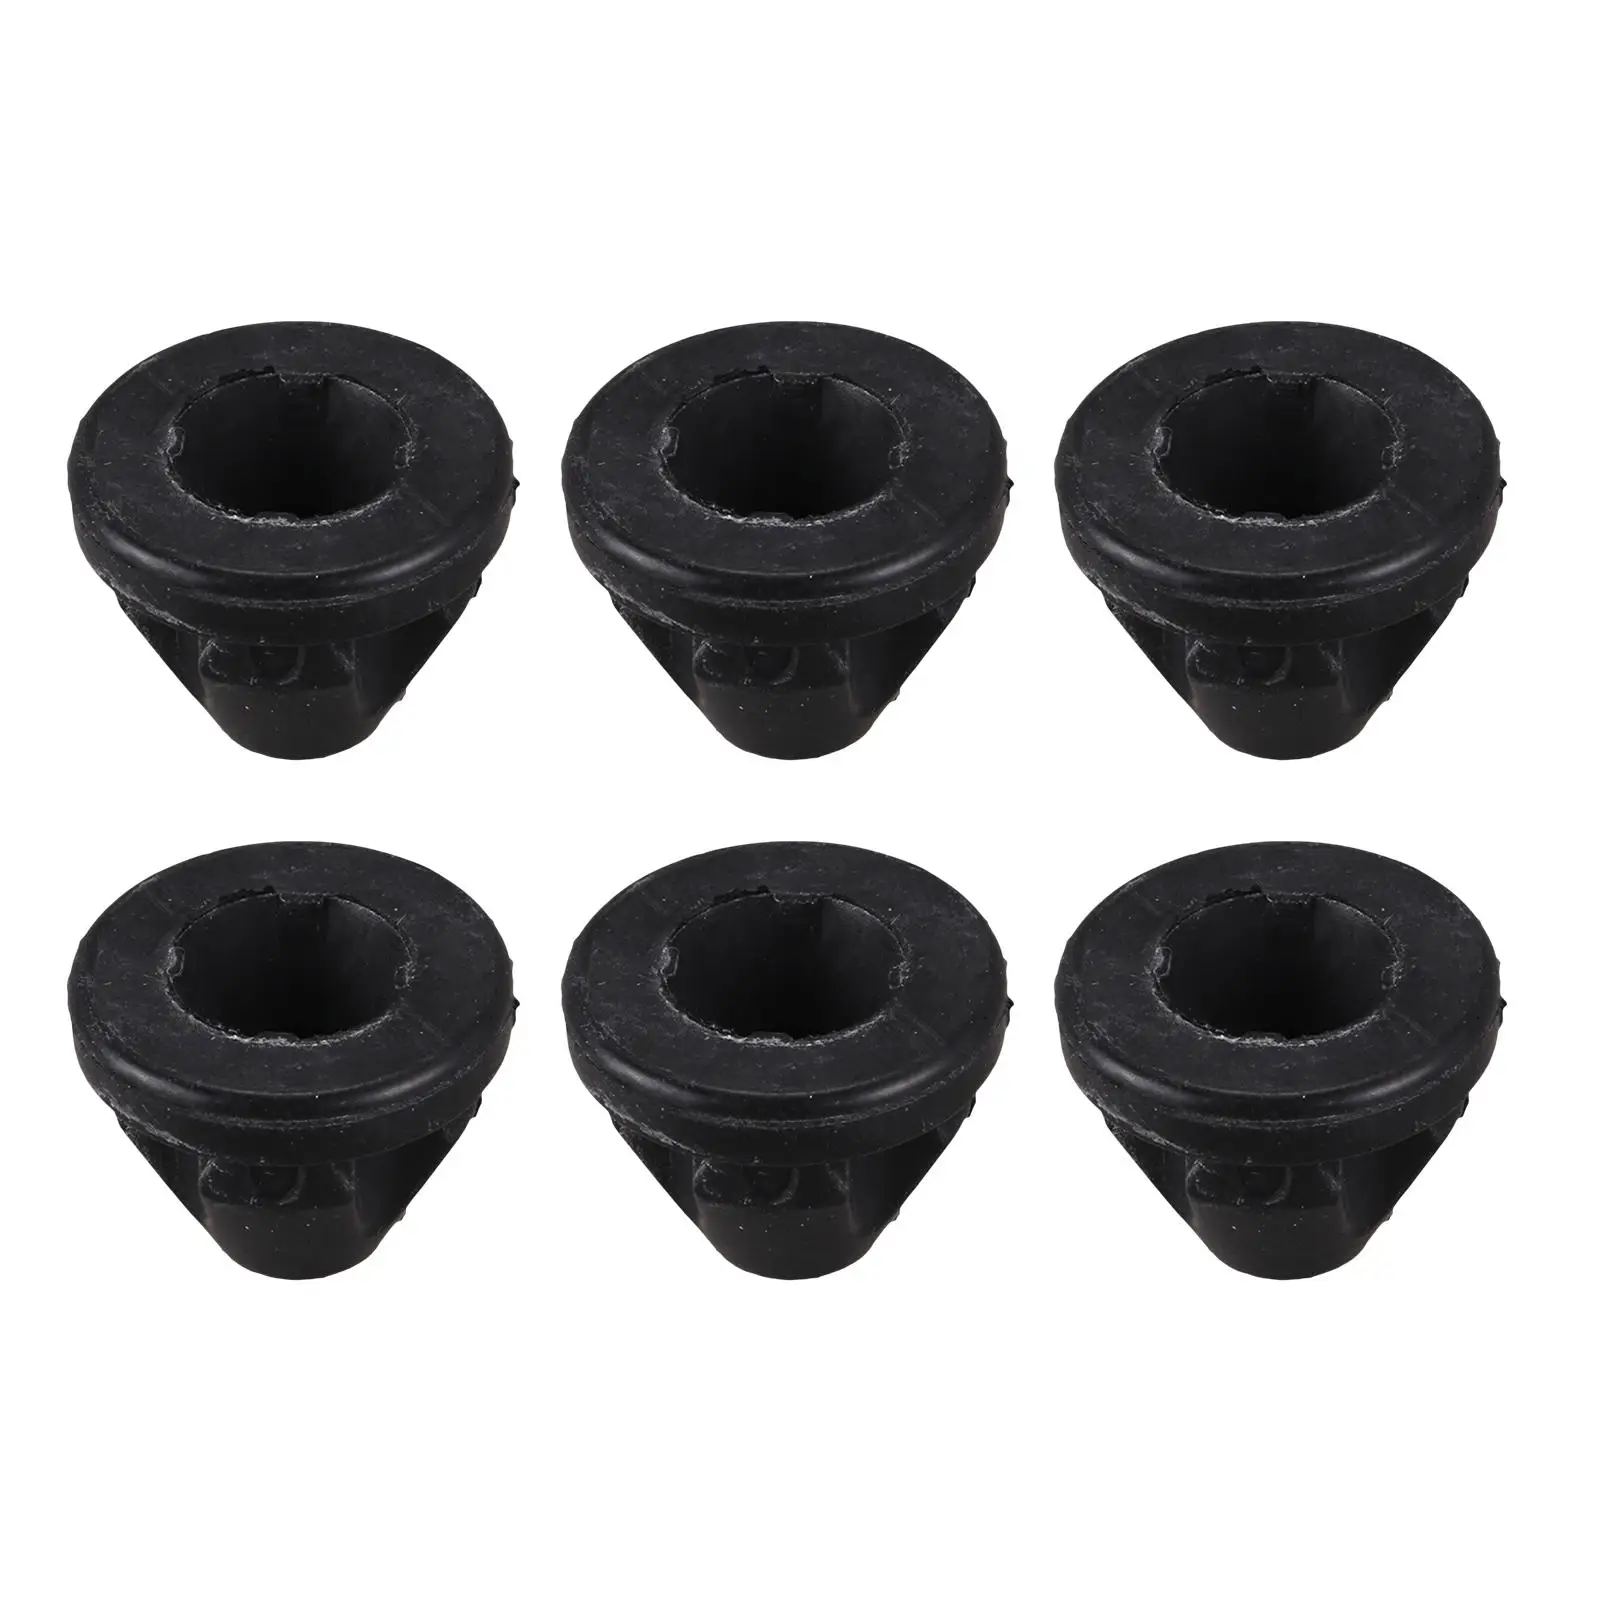 6x Engine Cover Grommet 03G103184C Automotive Replacement High Performance Gasket Premium Inner Tank Covers for Audi A3